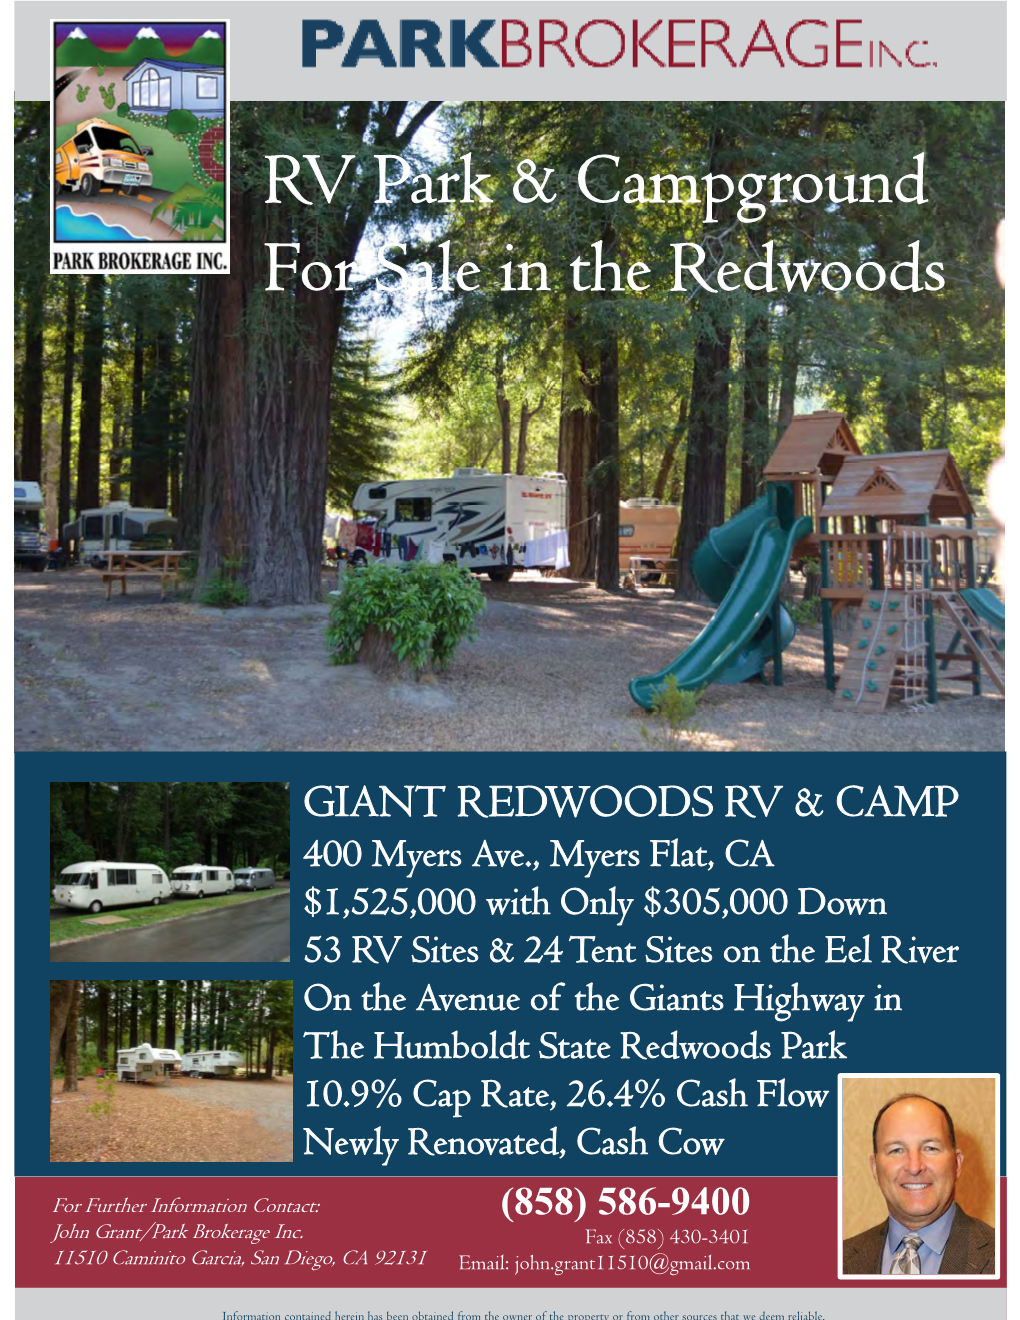 RV Park & Campground for Sale in the Redwoods